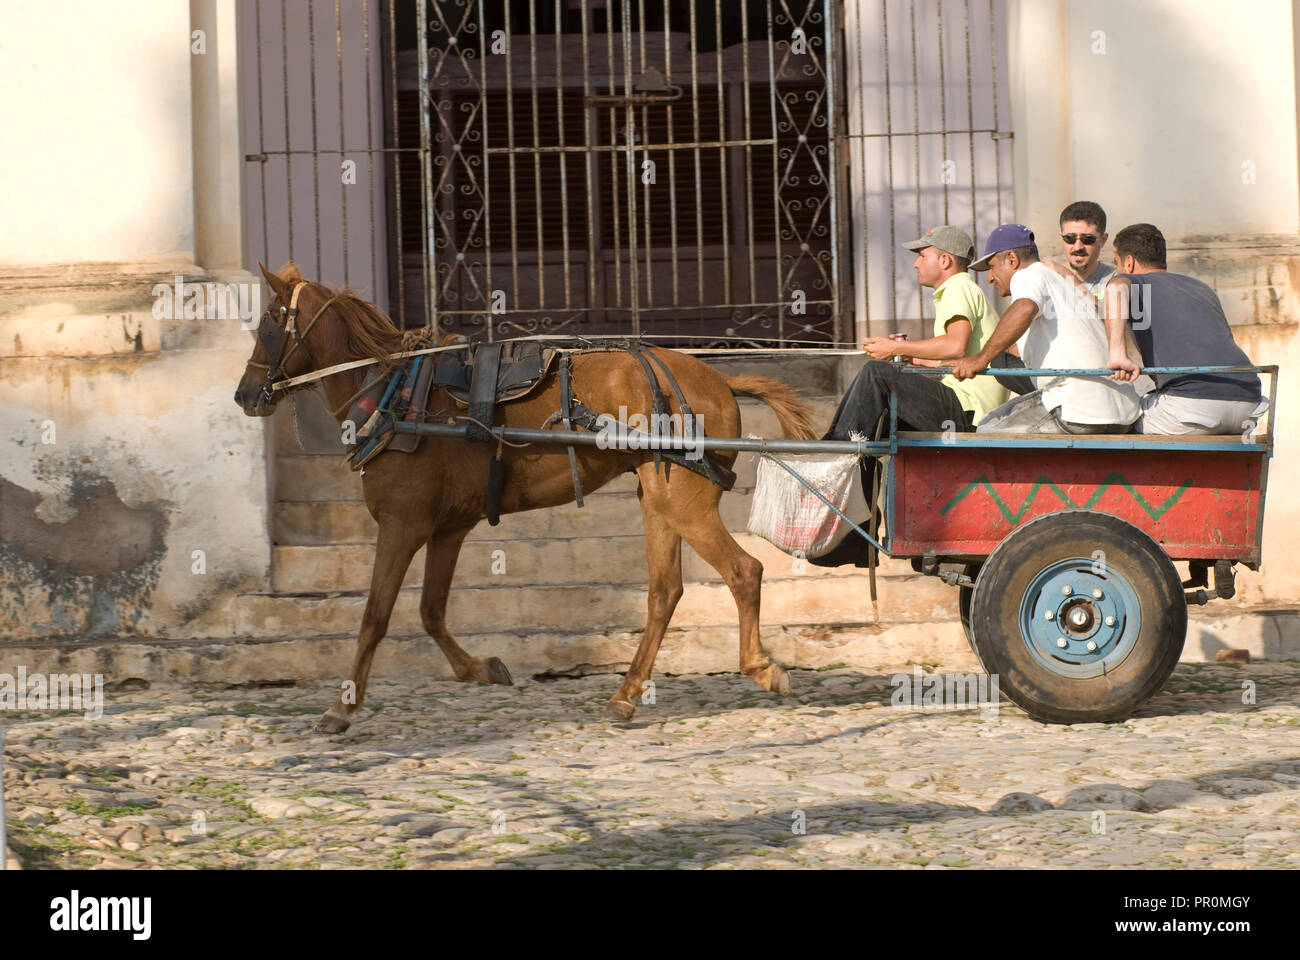 Horse and carriage loaded with locals in Trinidad Cuba Stock Photo